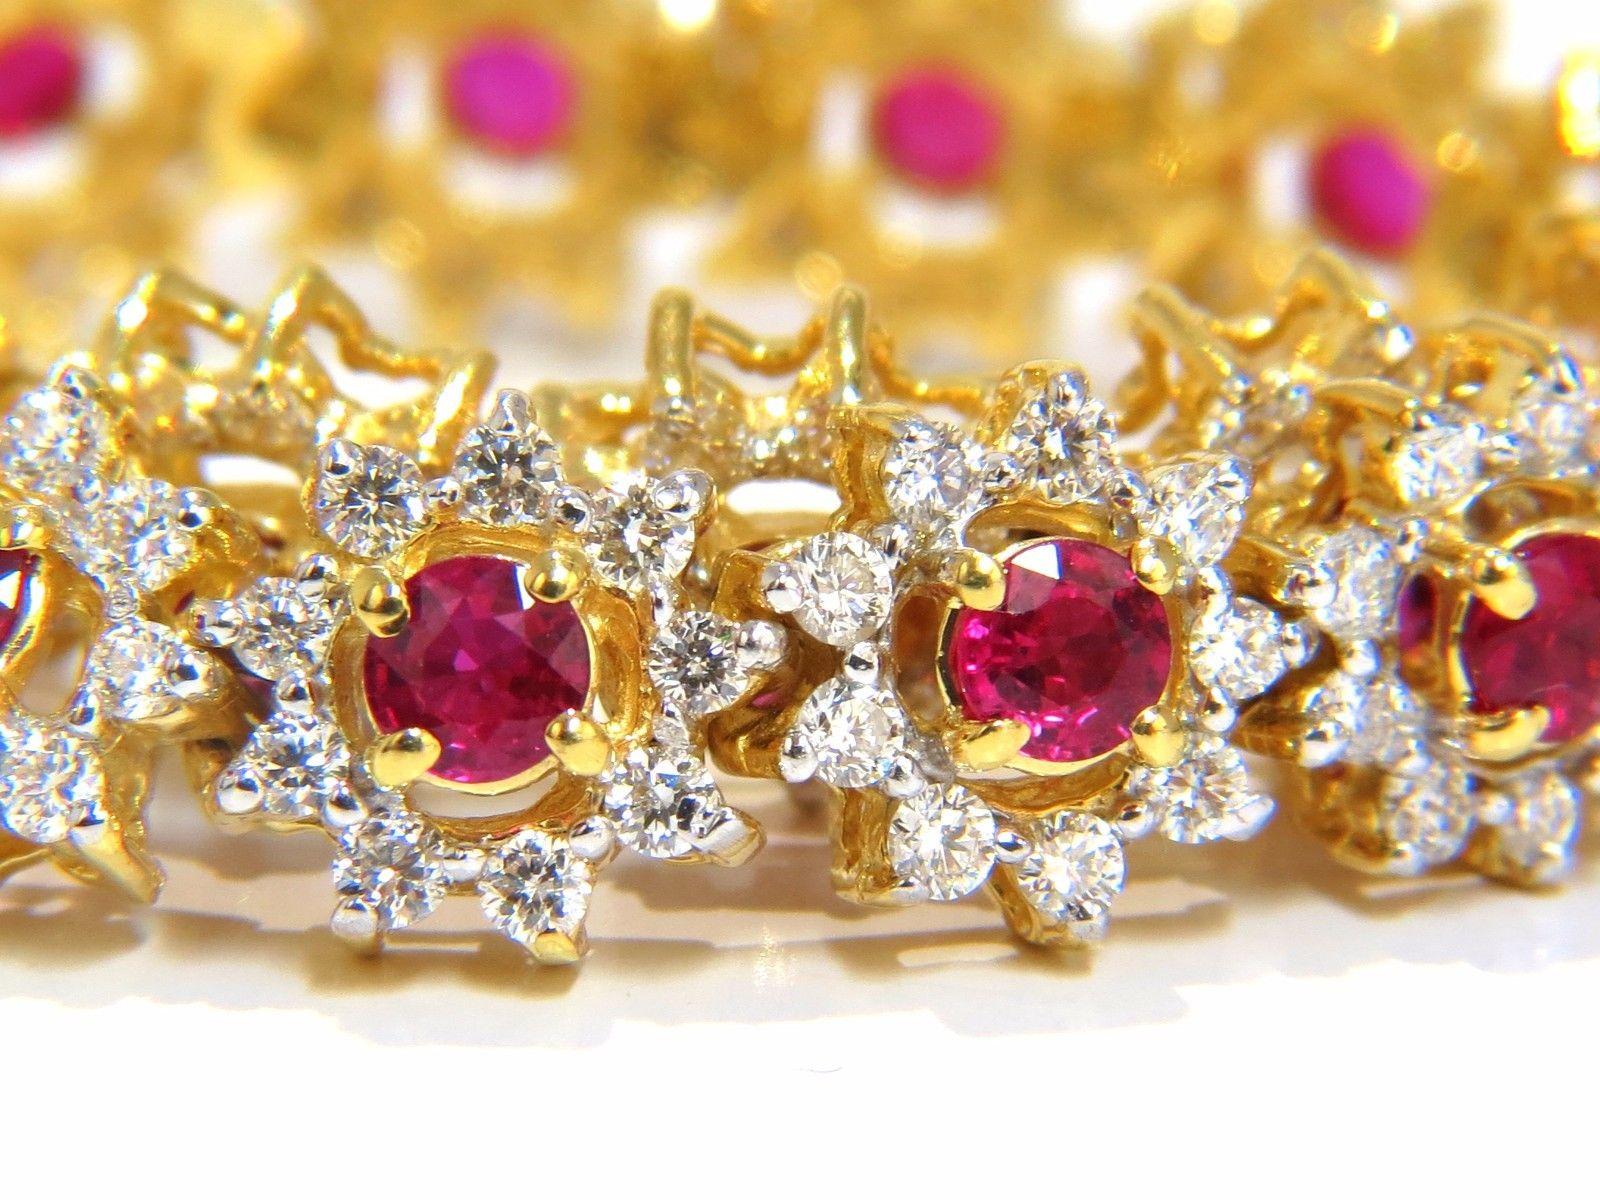 Round Cut 9.60 Carat Natural Bright Vivid Red Ruby Diamonds Clusters Tennis Bracelet For Sale